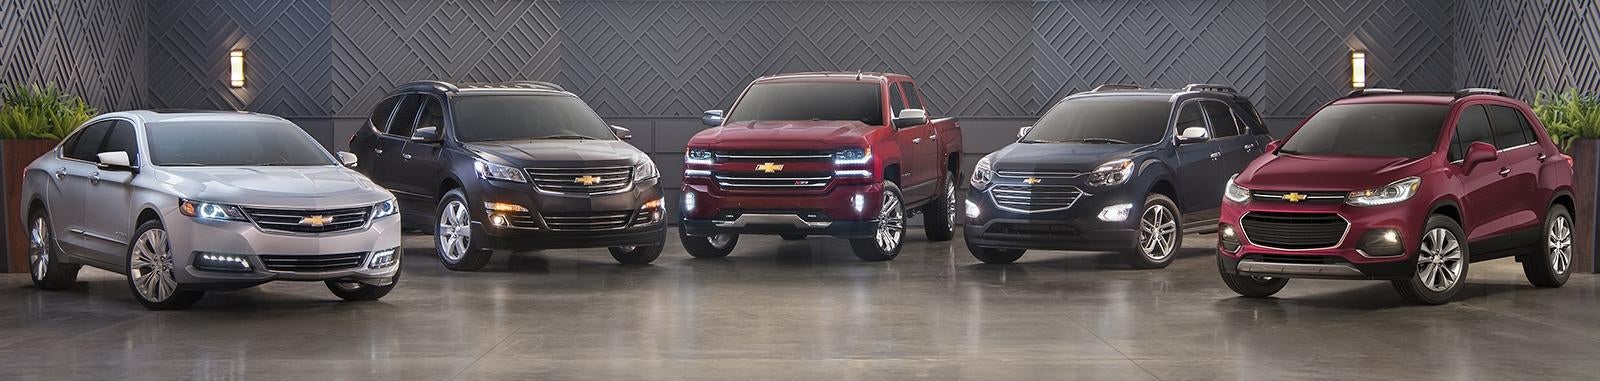 Chevy lineup